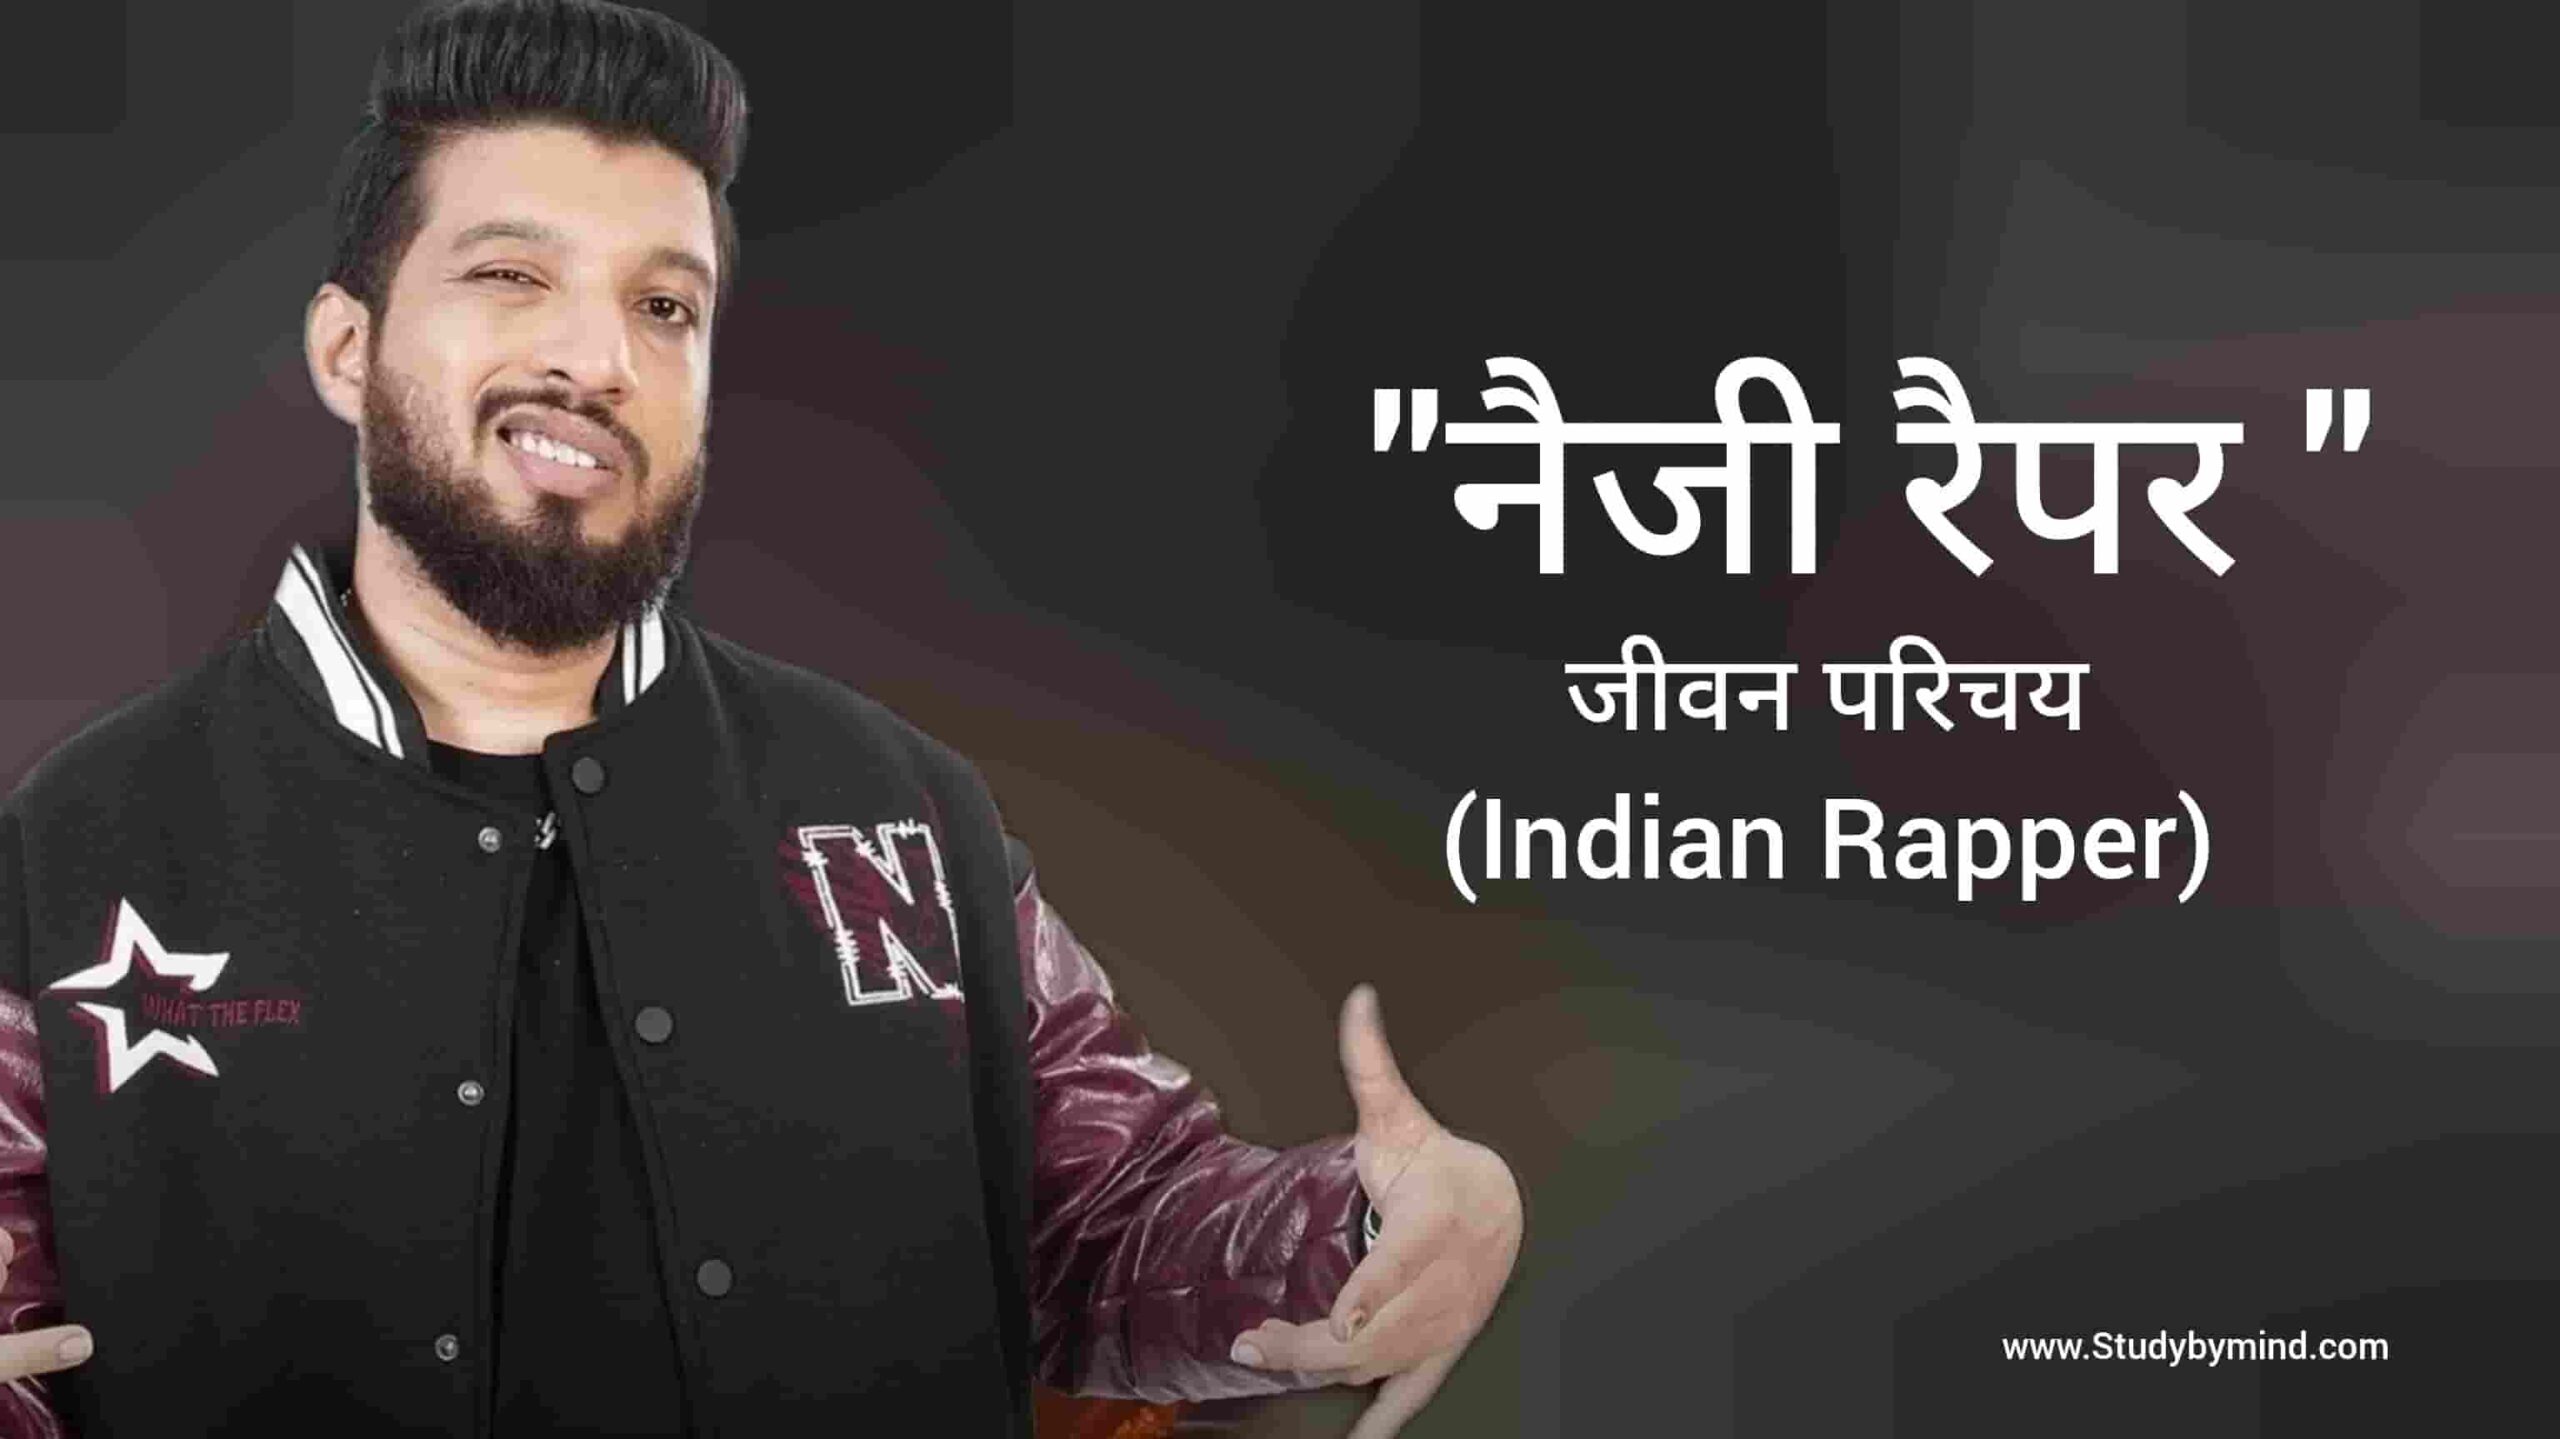 You are currently viewing नैज़ी जीवन परिचय Naezy biography in hindi  (भारतीय रैपर)